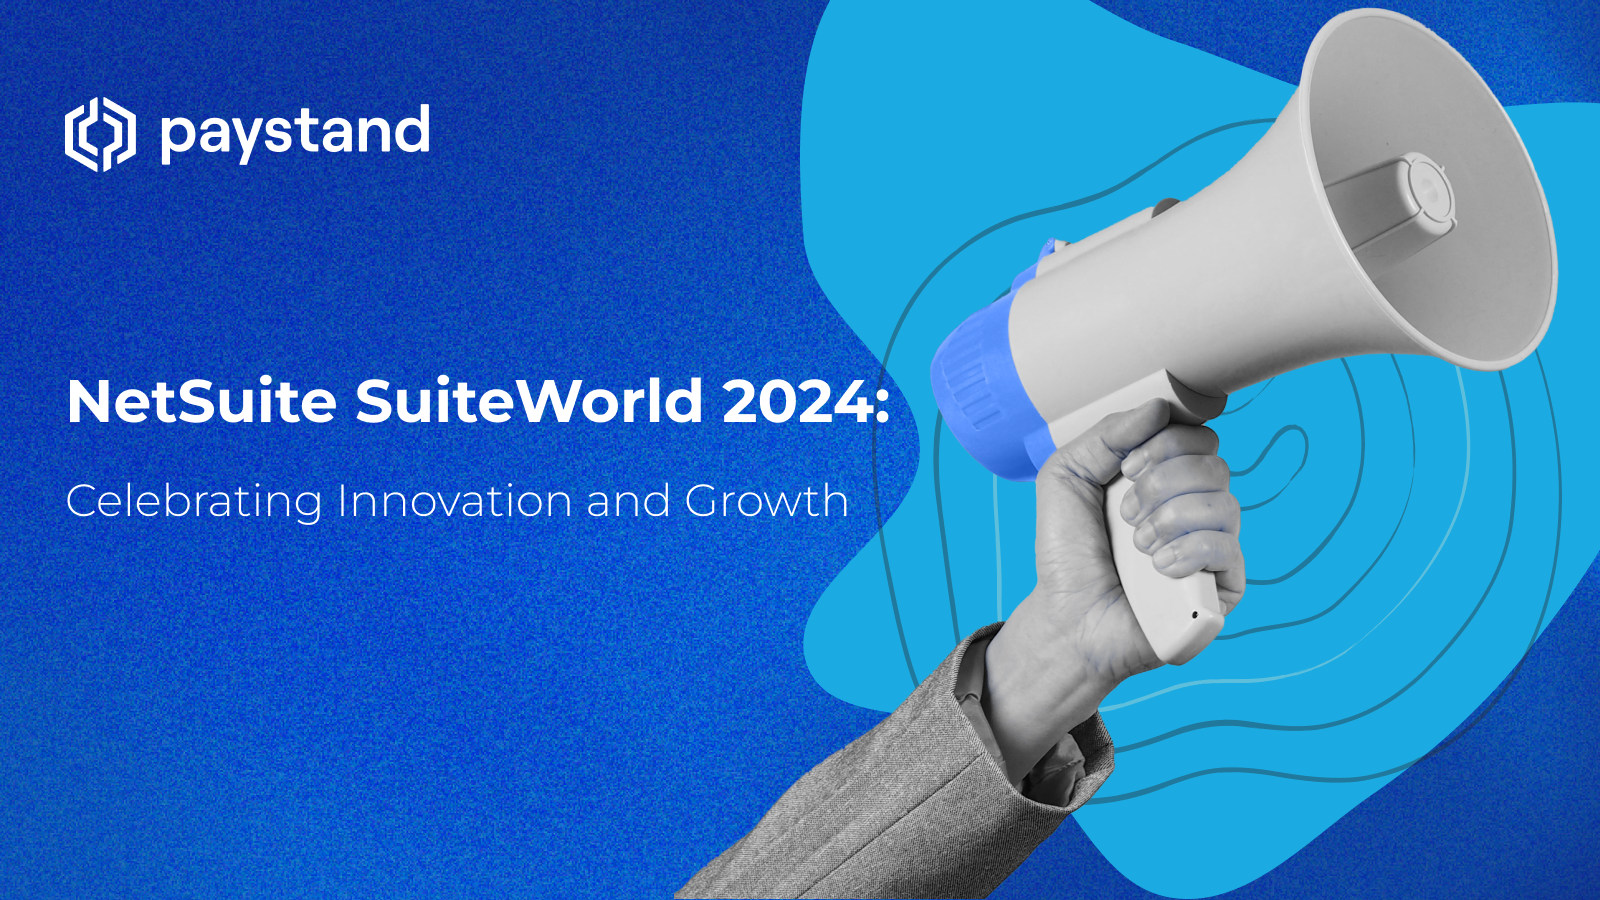 NetSuite SuiteWorld 2024: Celebrating Innovation and Growth